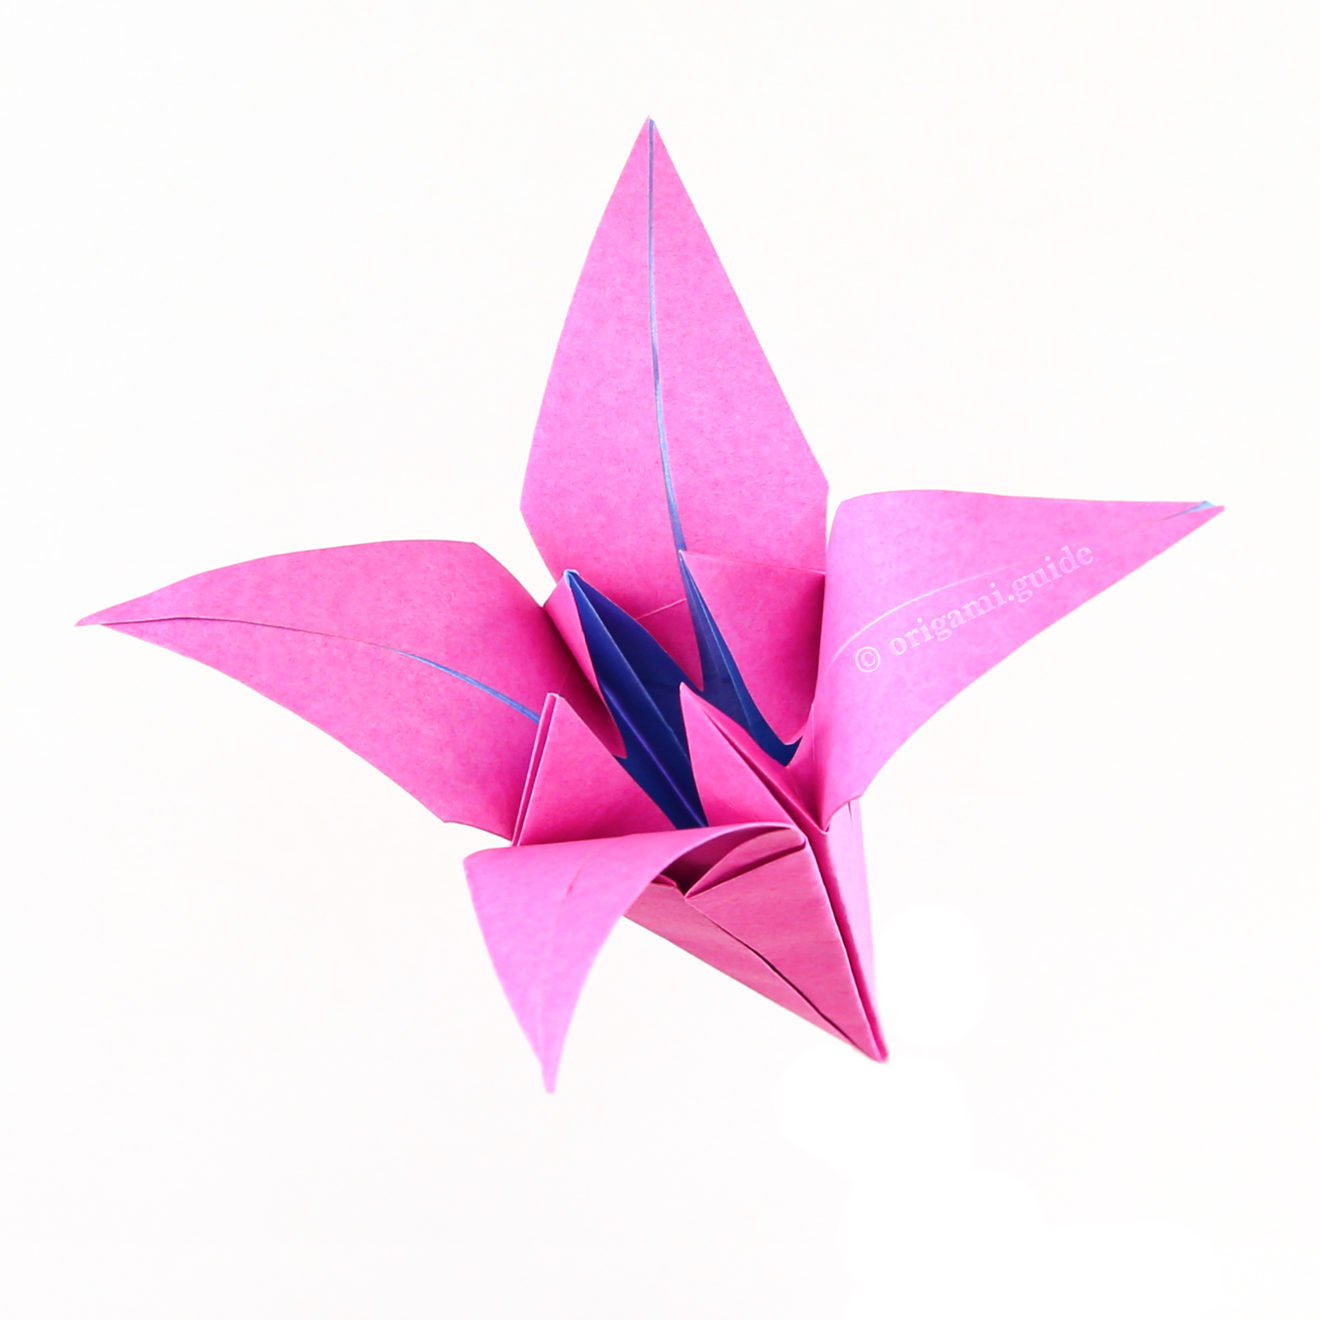 How To Make An Origami Lily Flower - Folding Instructions - Origami Guide